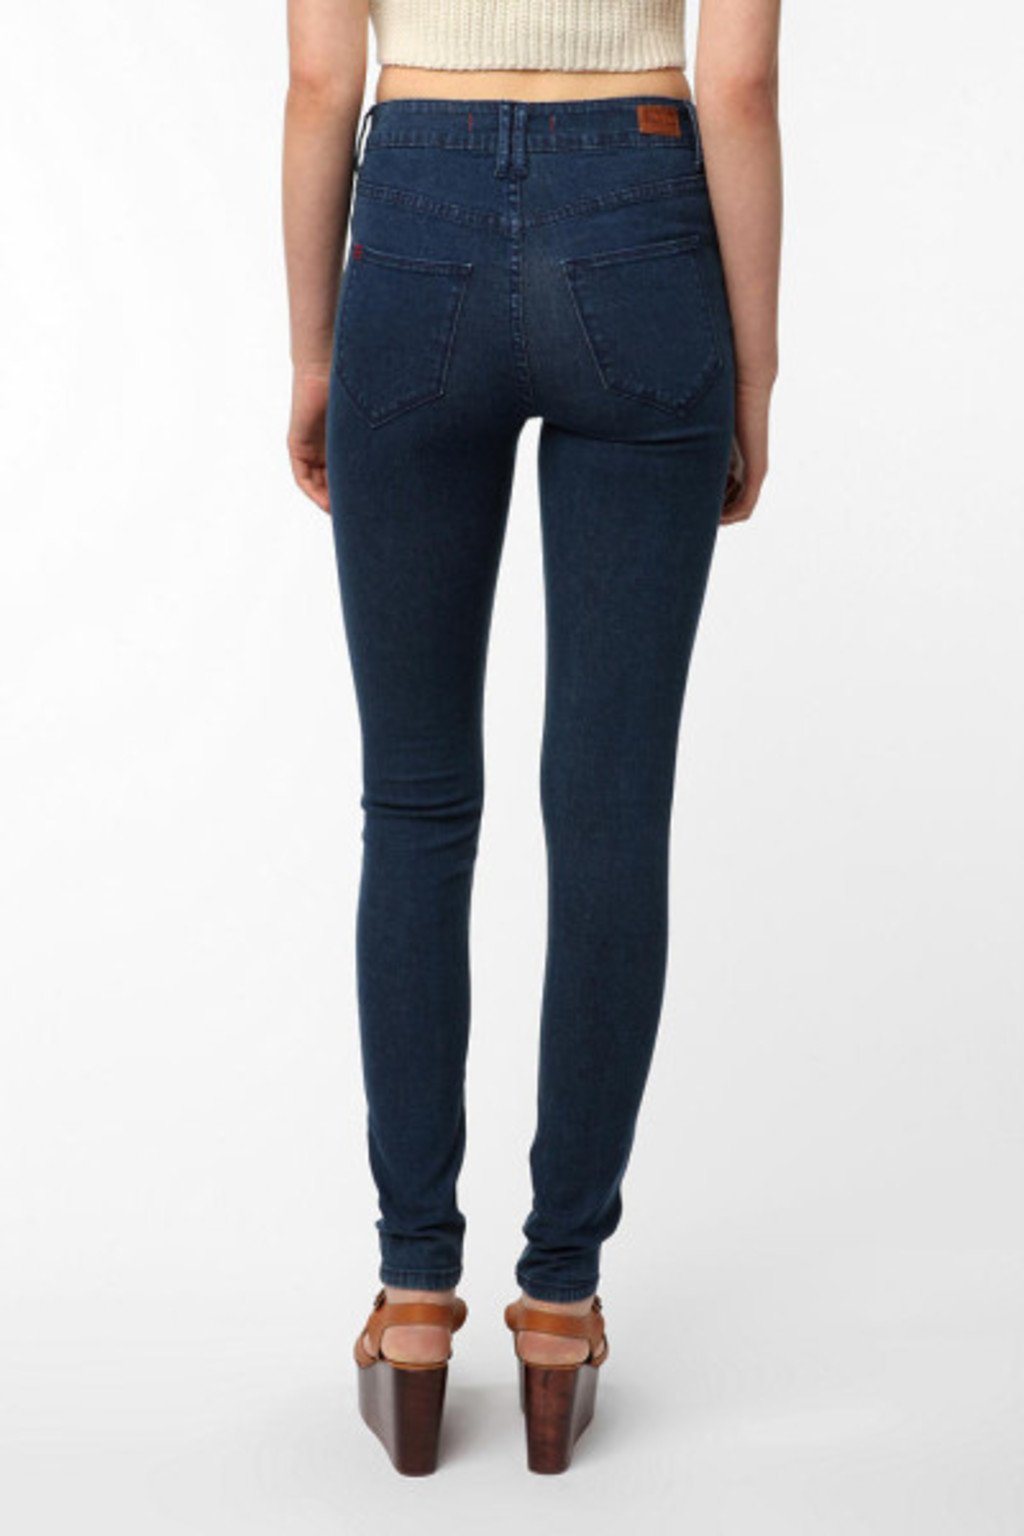 UO jeans